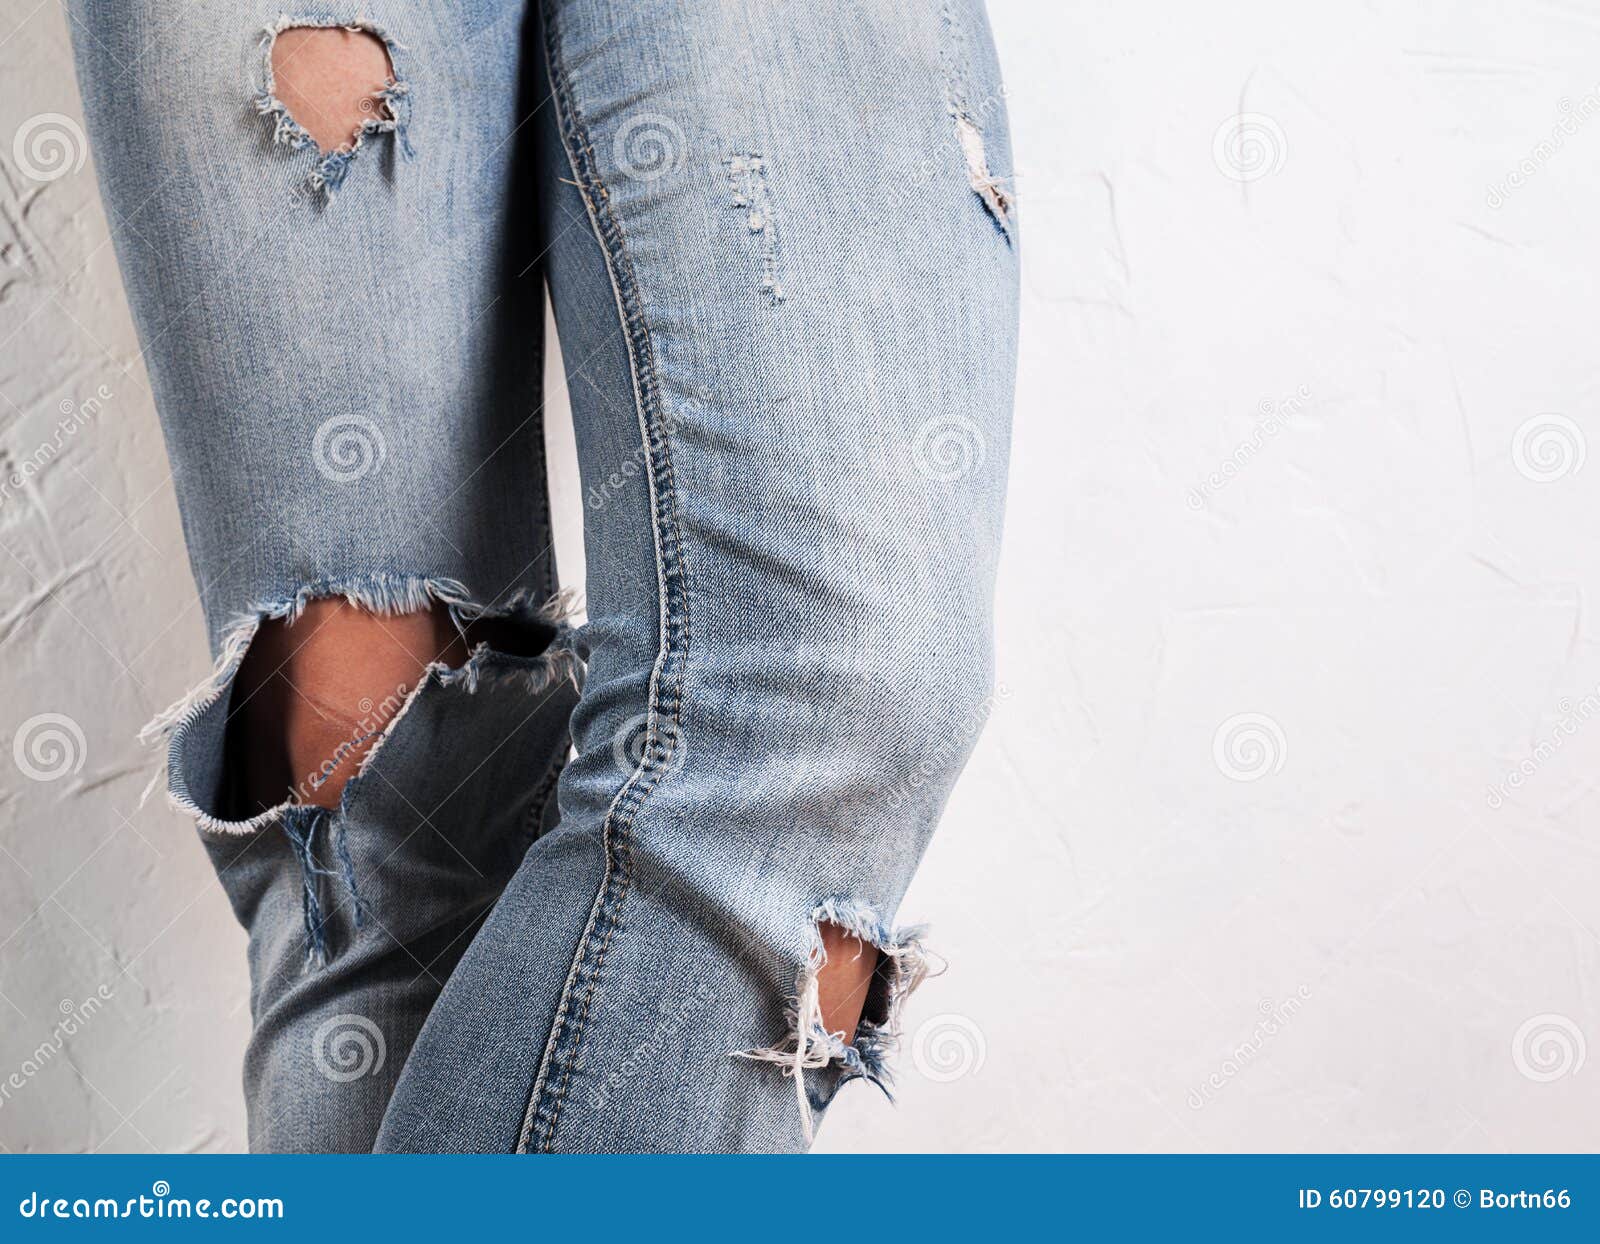 Ripped jeans stock photo. Image of jeans, stylish, feet - 60799120